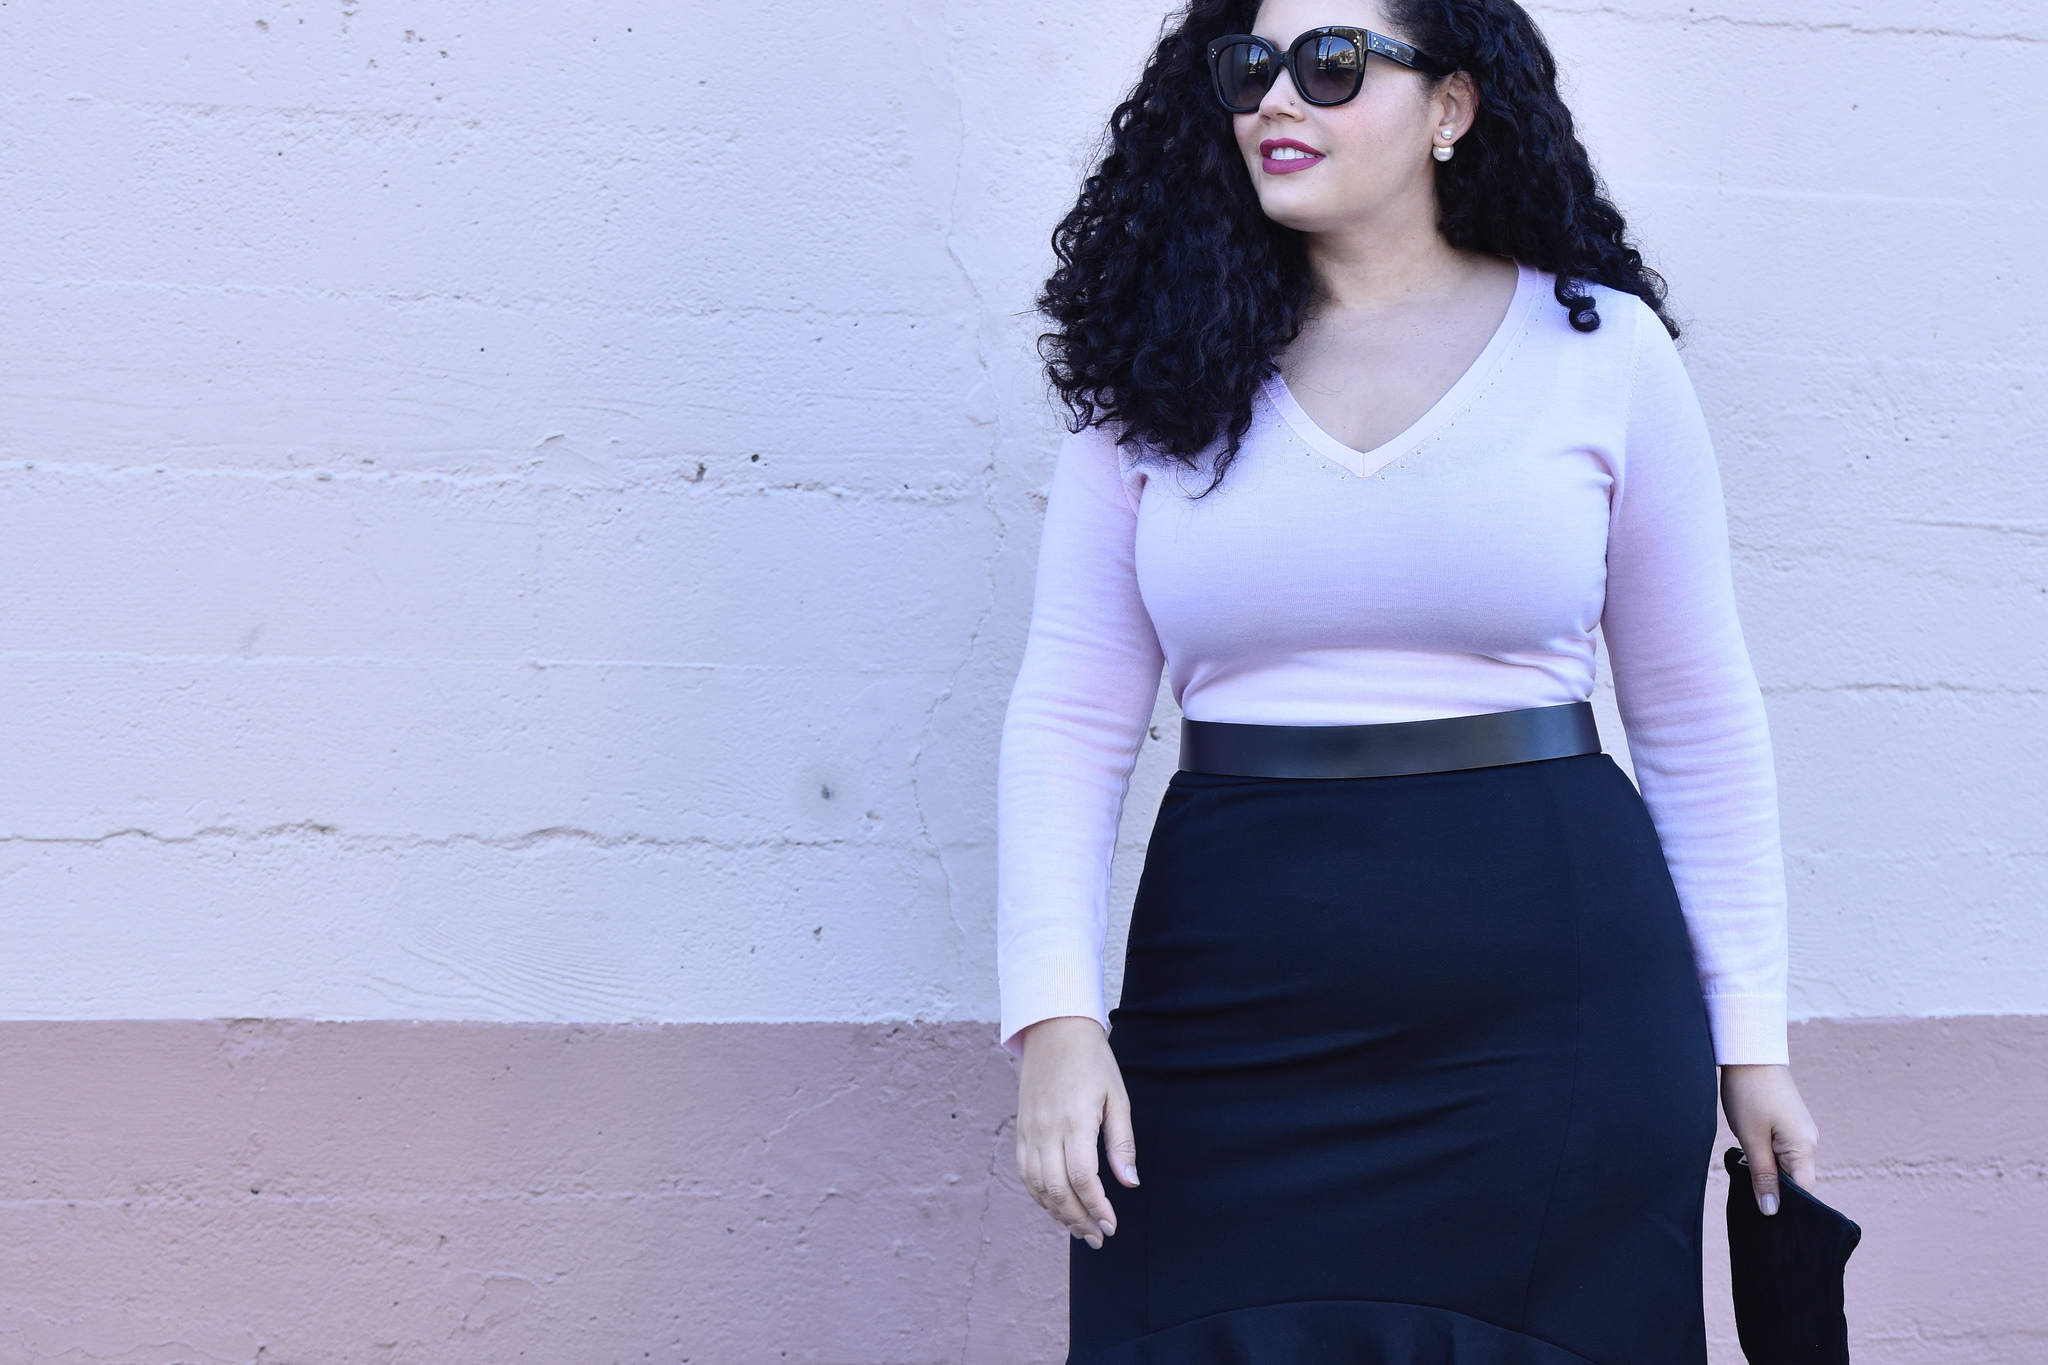 An Easy Date Night Look To Wear Now Via @GirlWithCurves #sexy #datenight #skirt